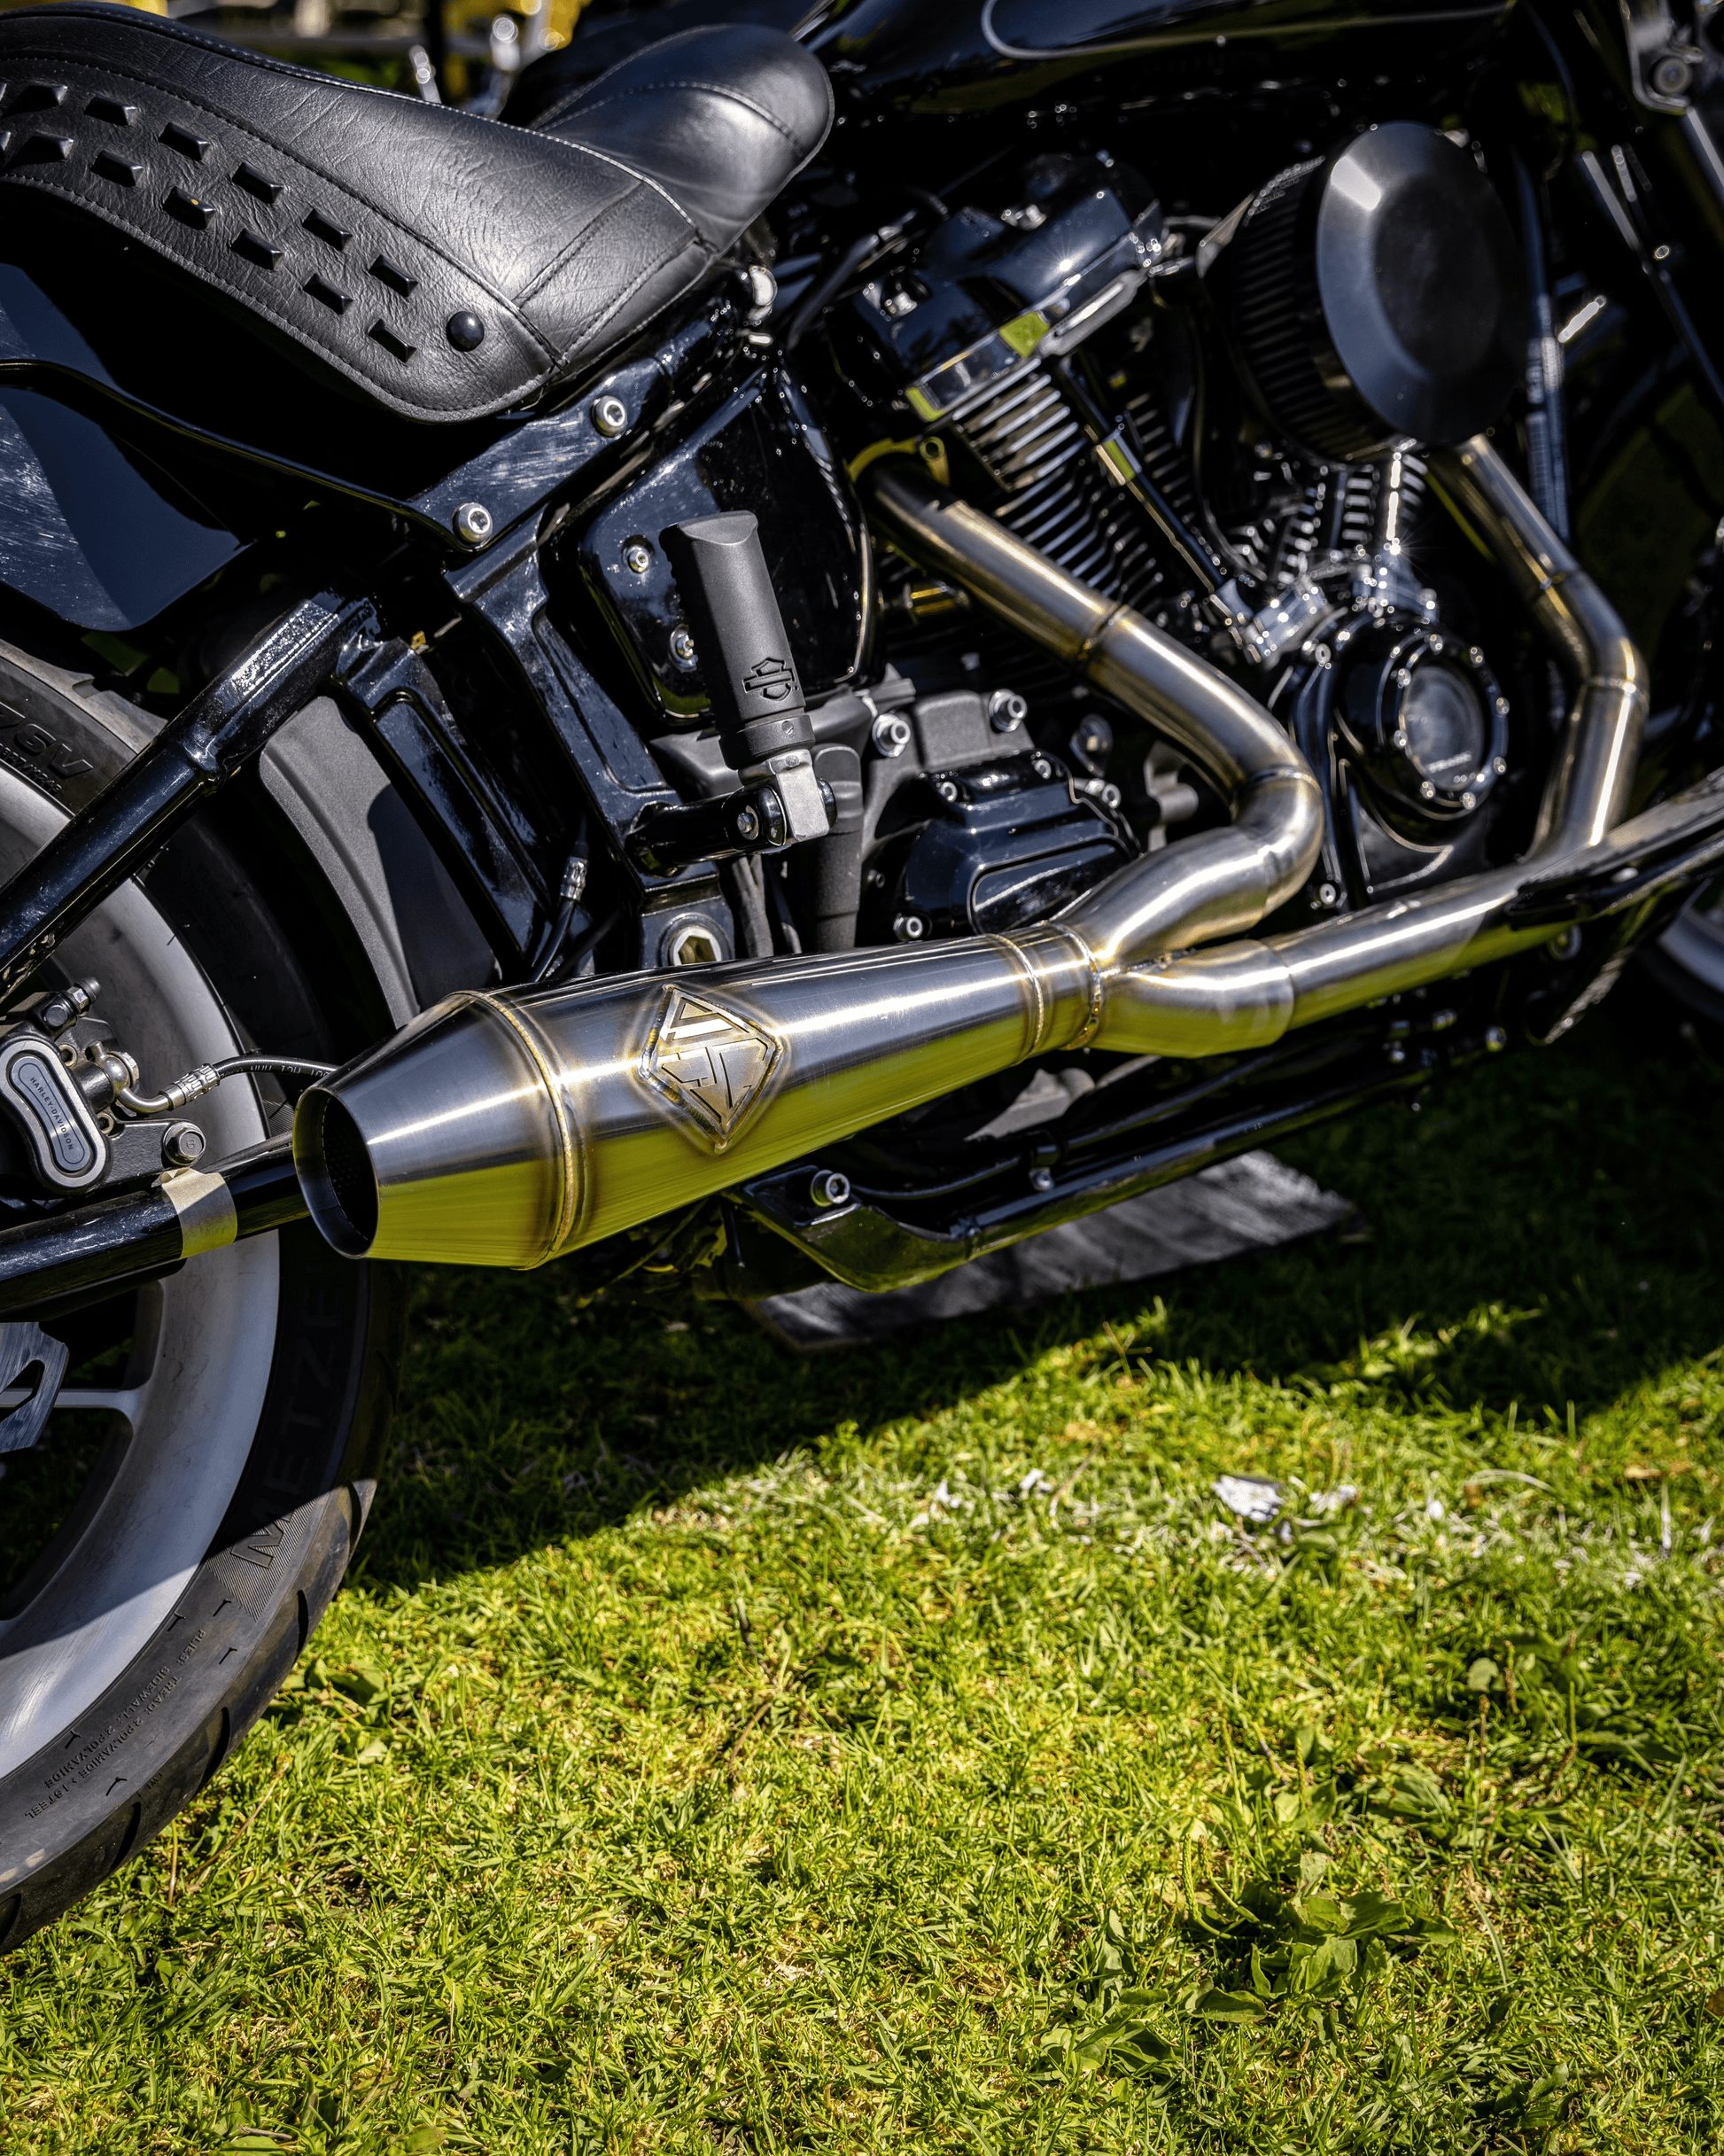 Dyna Harley Davidson Motorcycle with Big Bore Exhaust